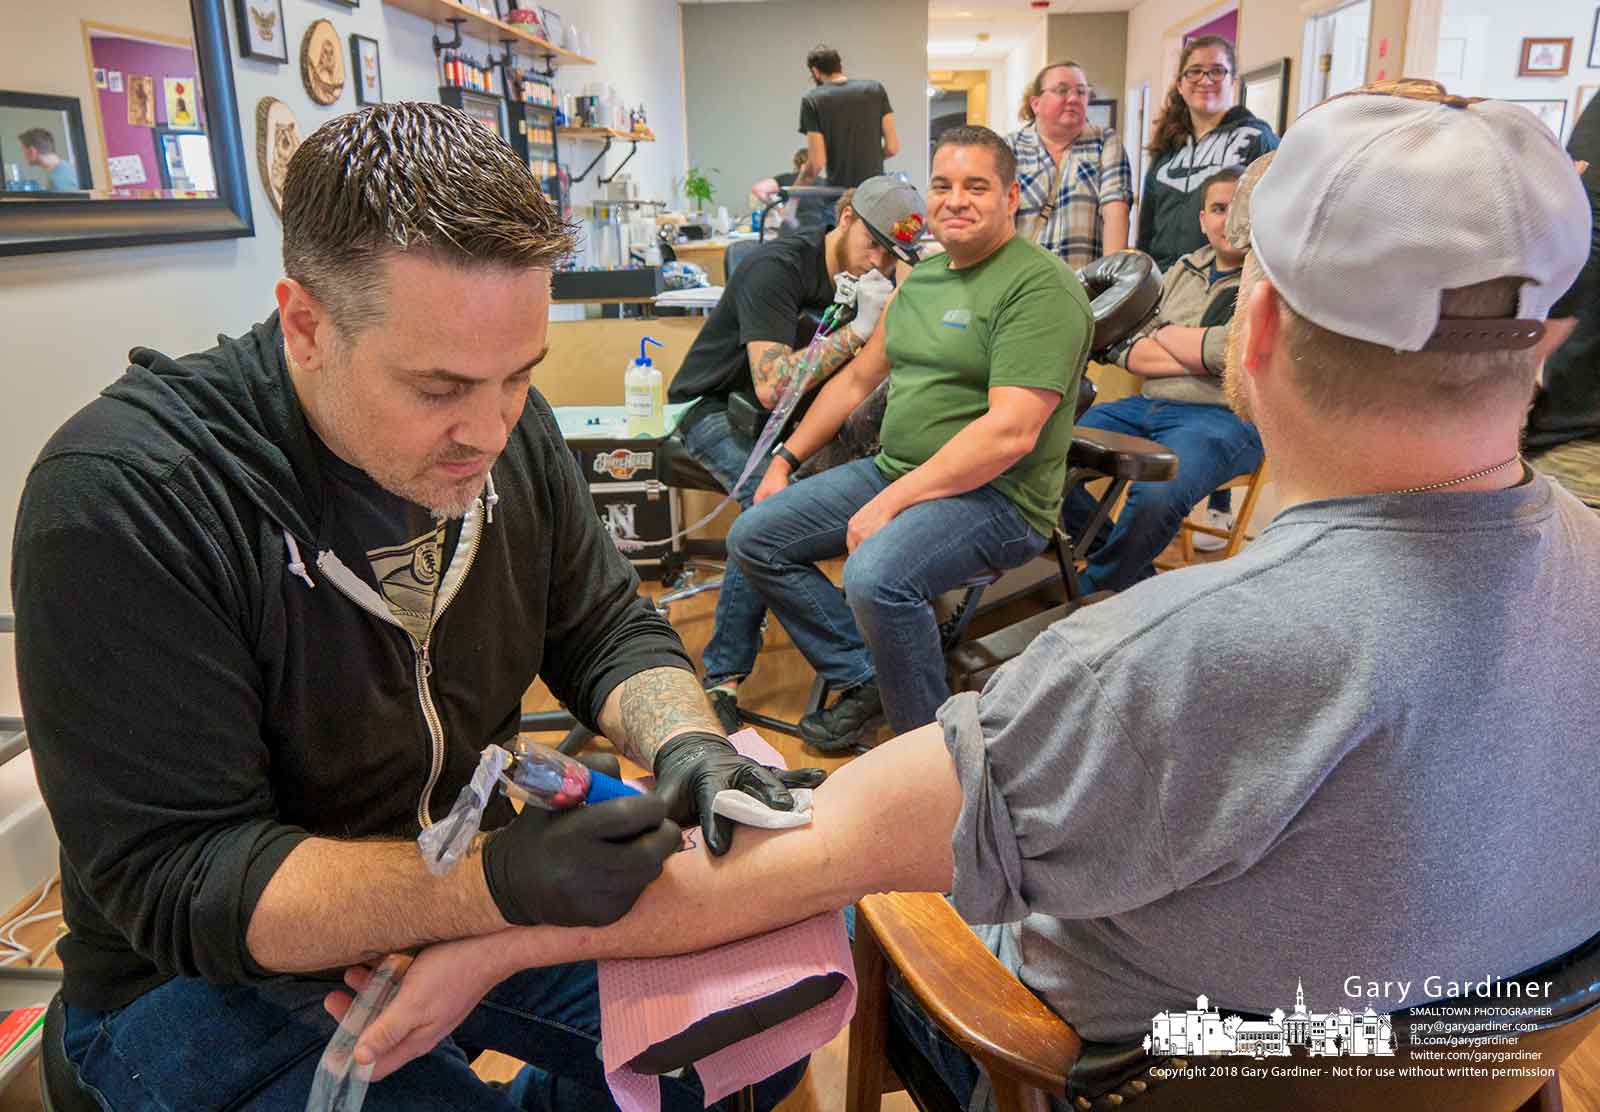 White Raven Tattoo Studio artists create Westerville BlueThin Line tattoos for customers whose money will be donated for use by the children of police officers Morelli and Joering who were killed two weeks ago. My Final Photo for Feb. 24, 2018.